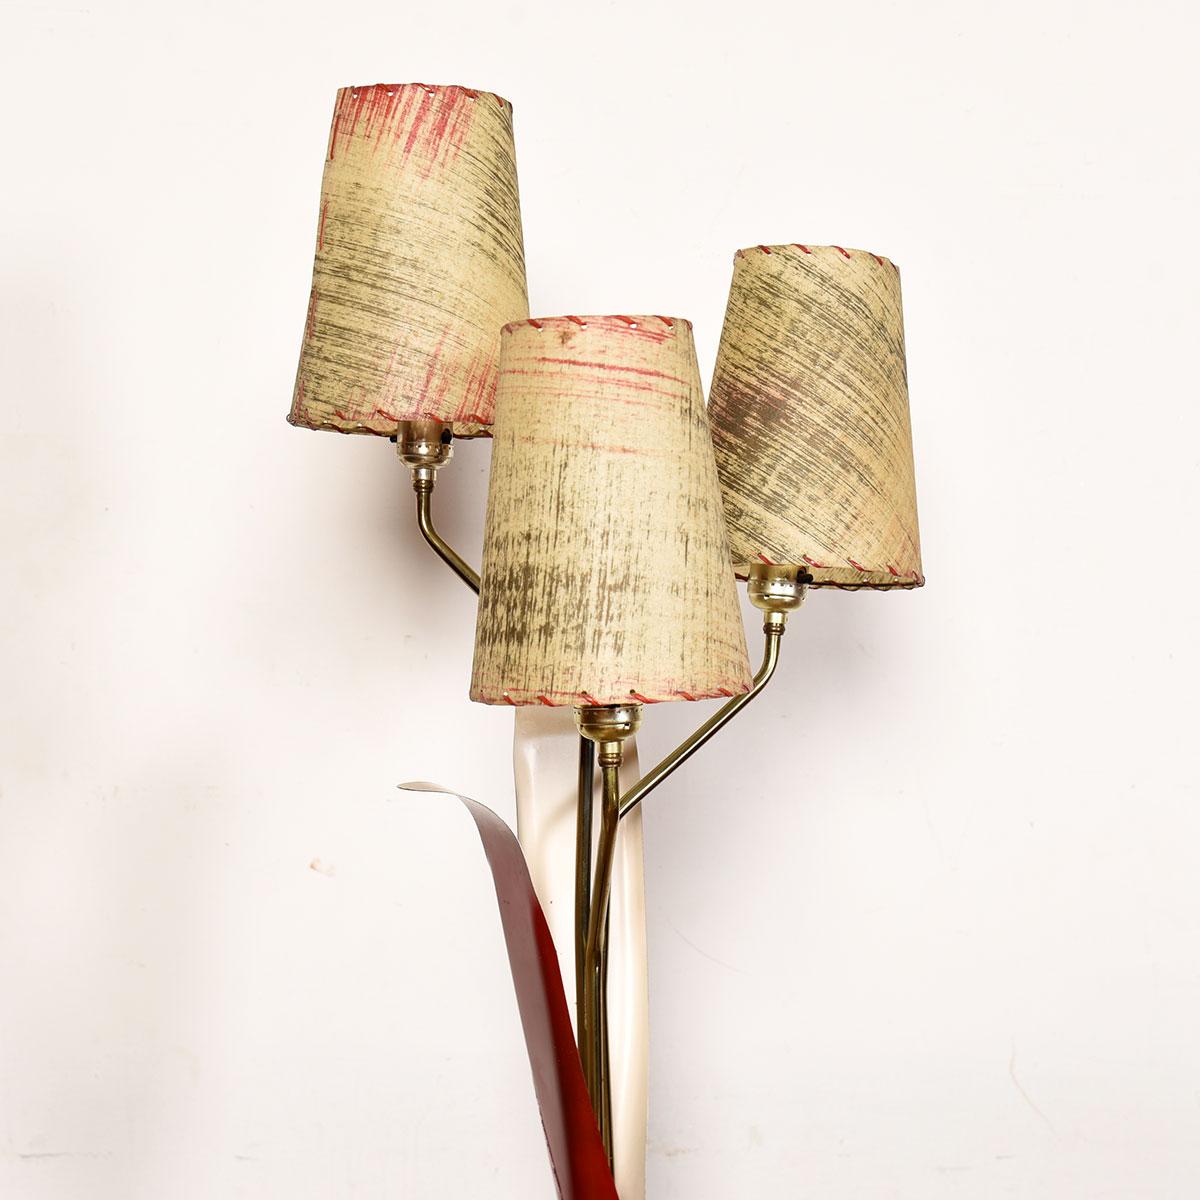 MCM Red Metal Floor Lamp with Leaves and Petals

Additional information:
Material: Metal
Featured at Kensington

Dimension: W 15? x D 8? x H 60?